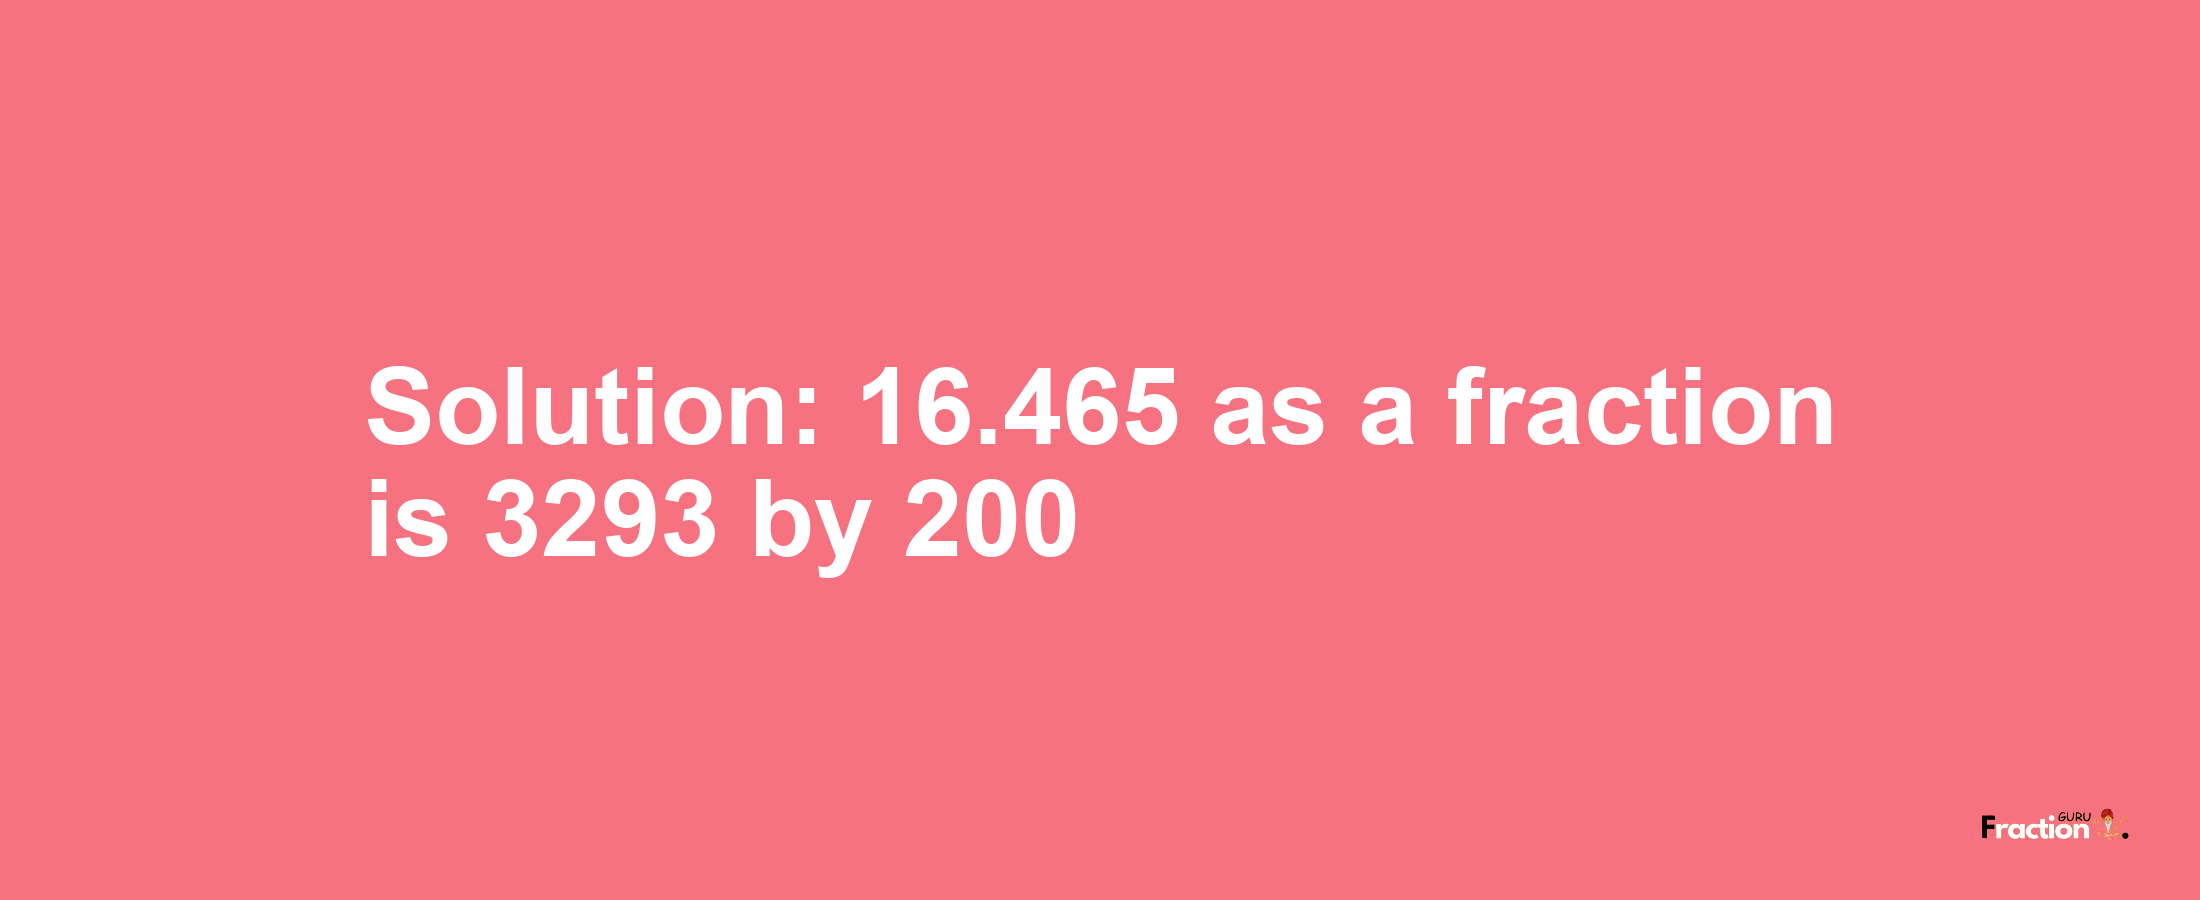 Solution:16.465 as a fraction is 3293/200